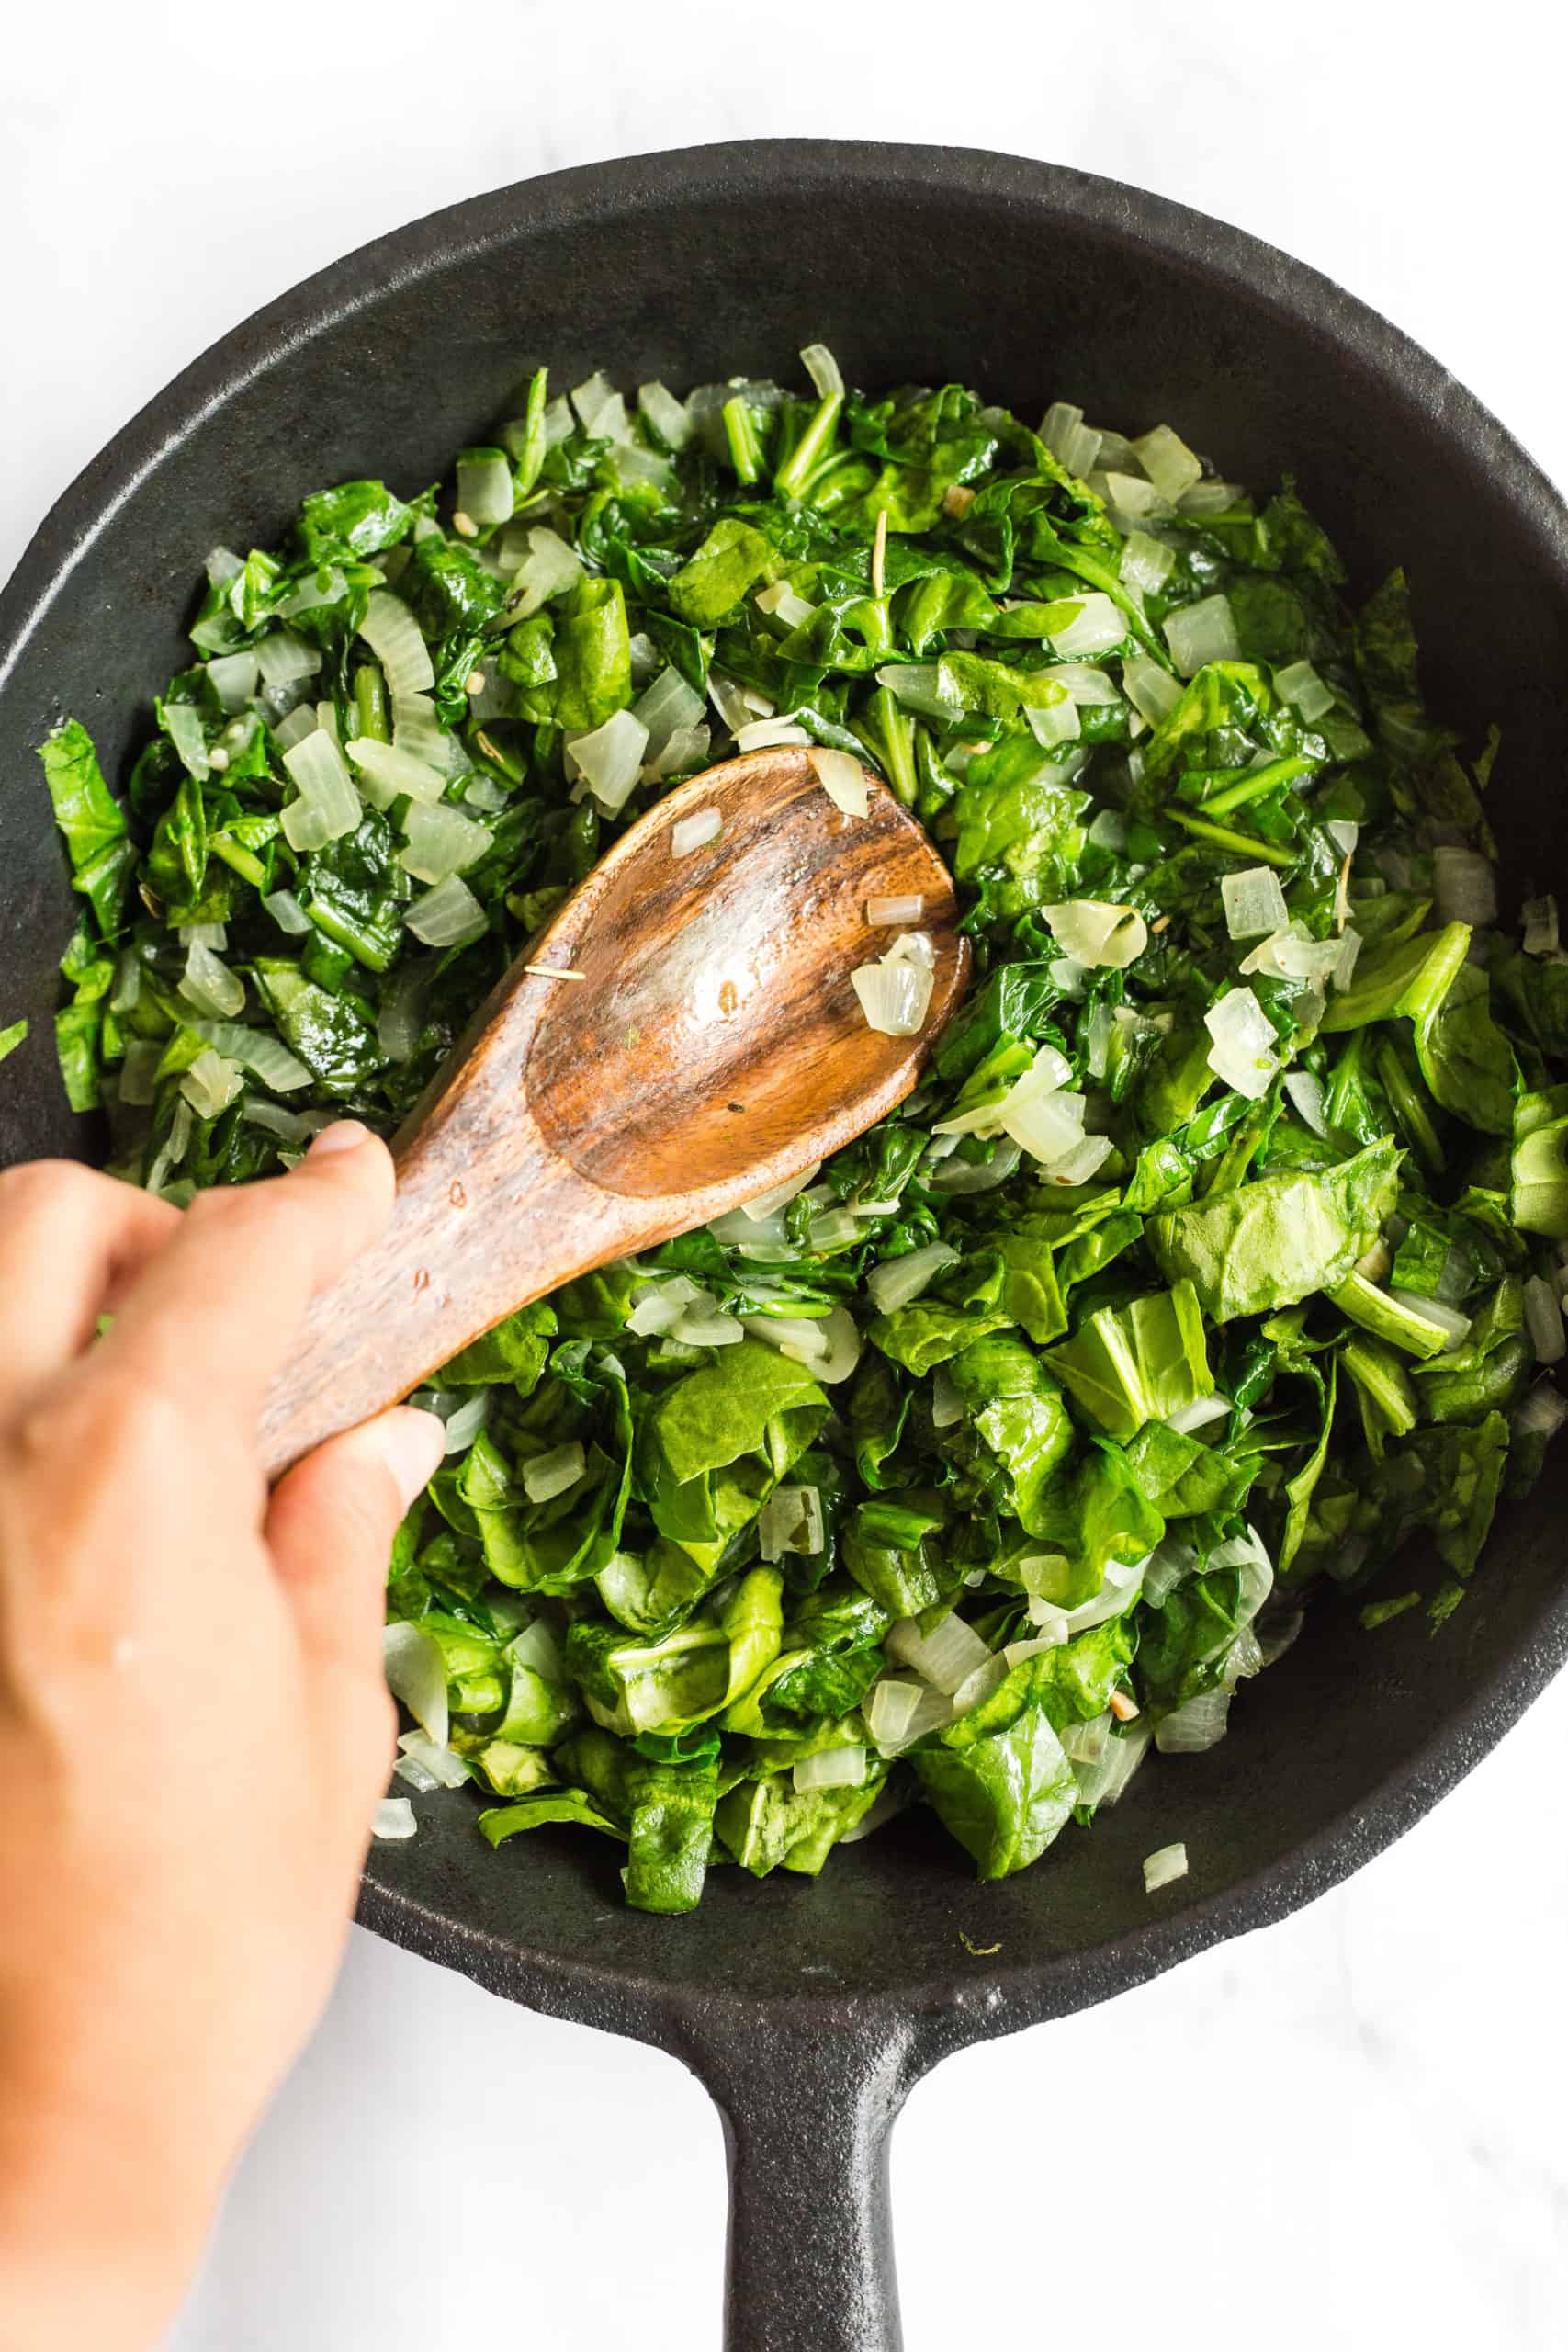 Sautéing onions and spinach in a cast iron skillet.